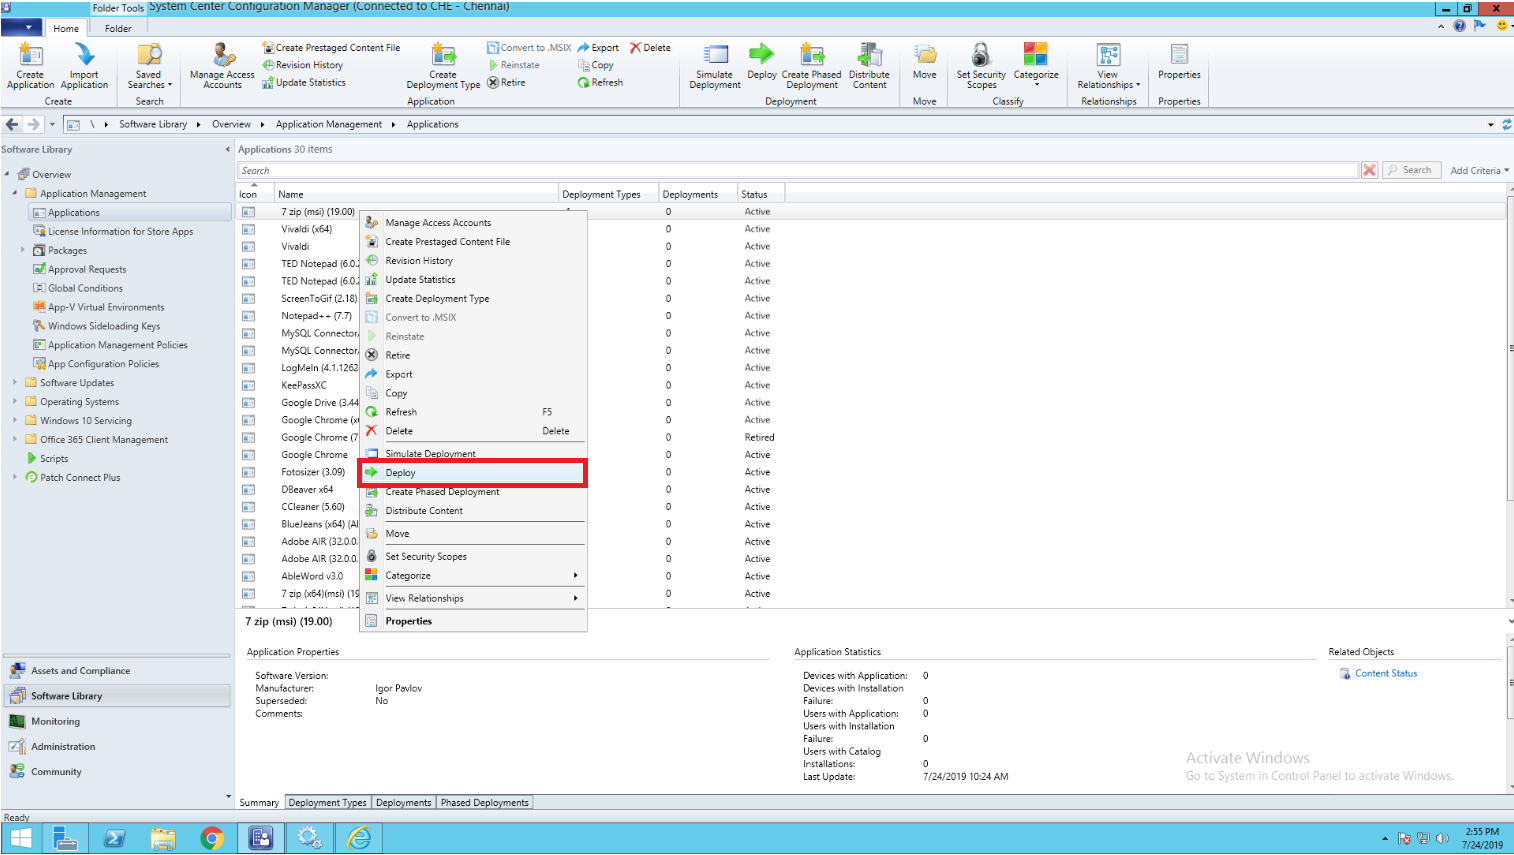 SCCM application deployment step by step - ManageEngine Patch Connect Plus